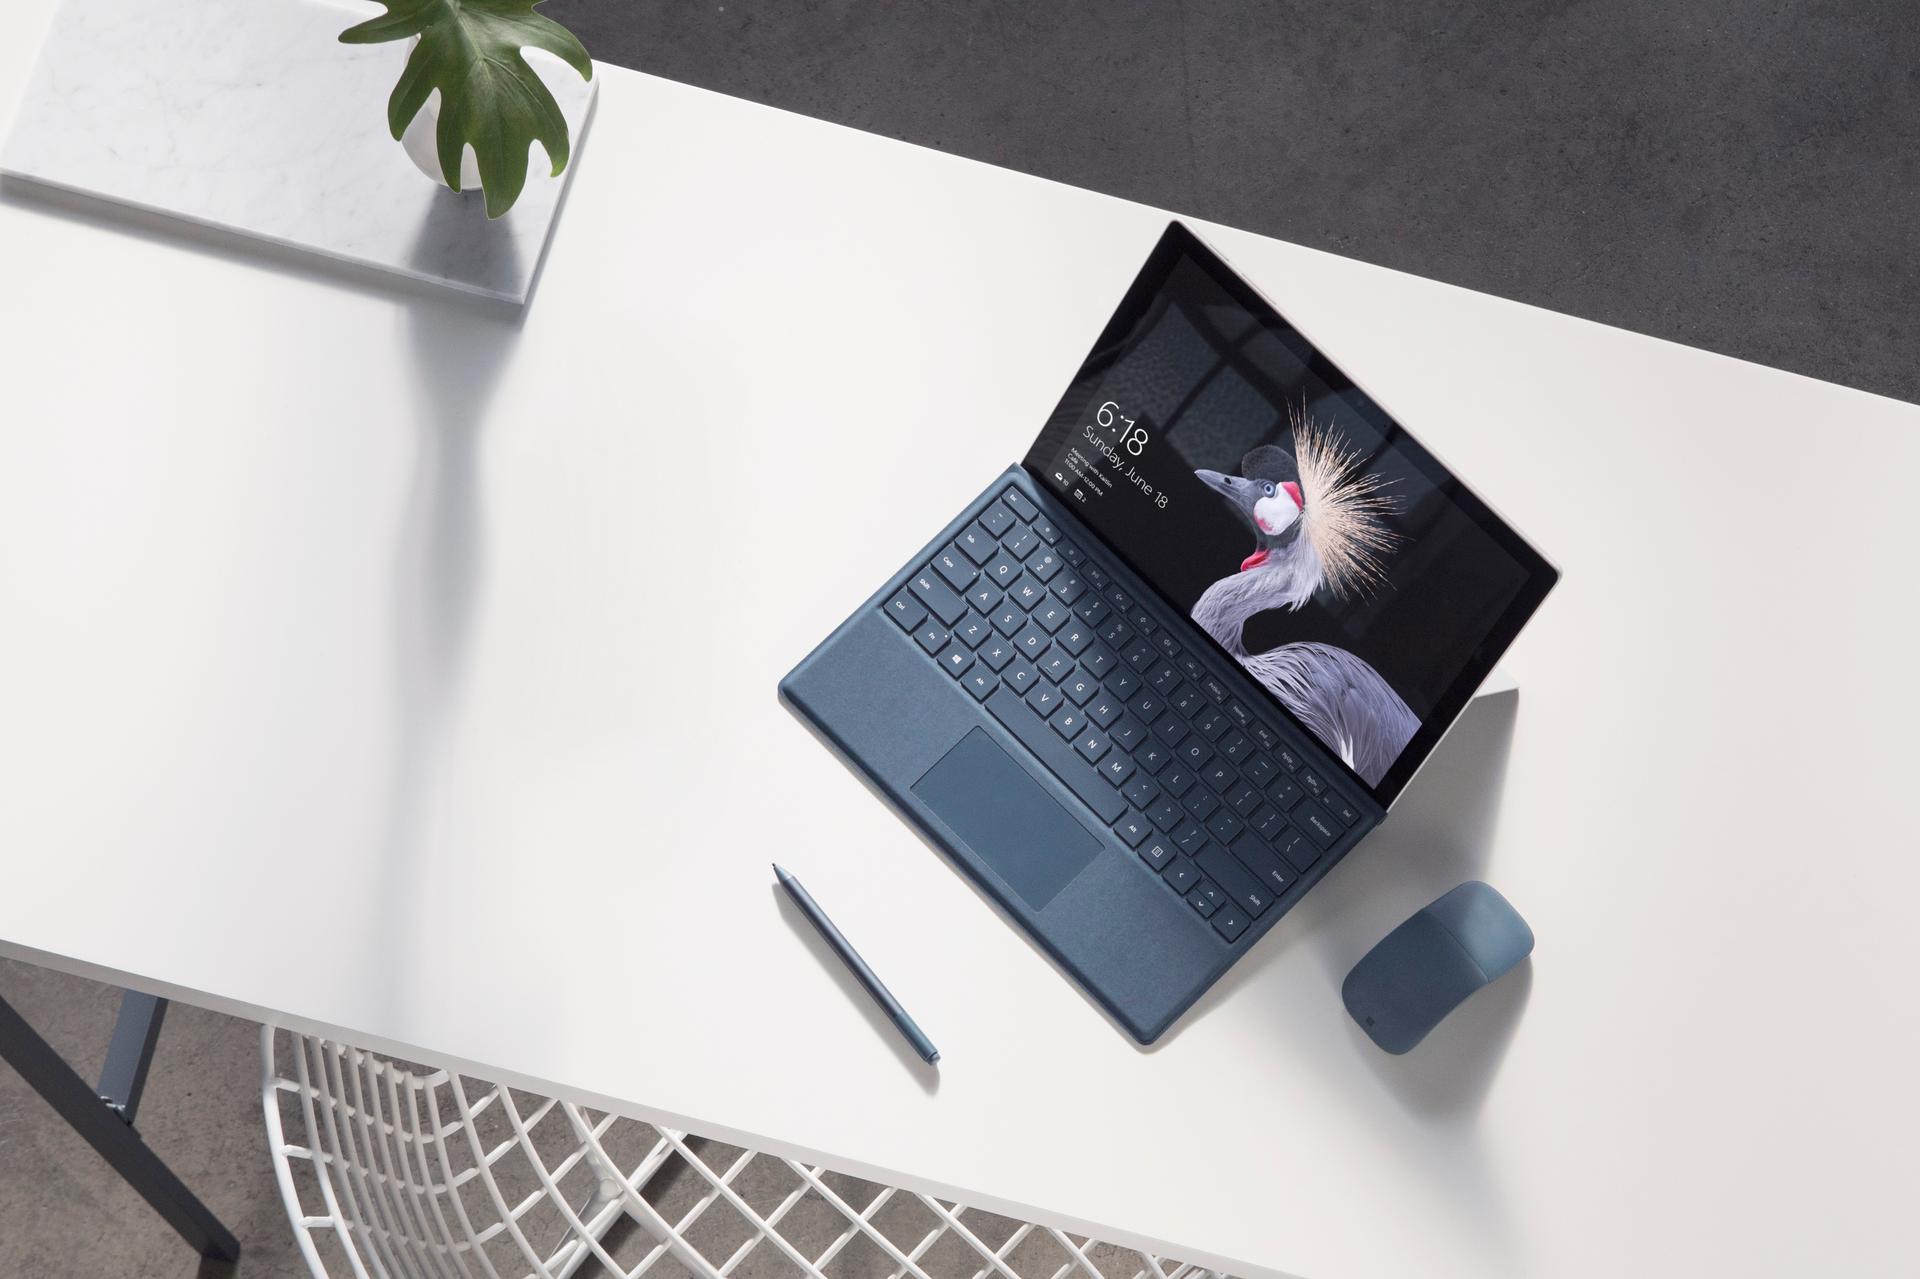 Start on tomorrow – today – with Microsoft Surface